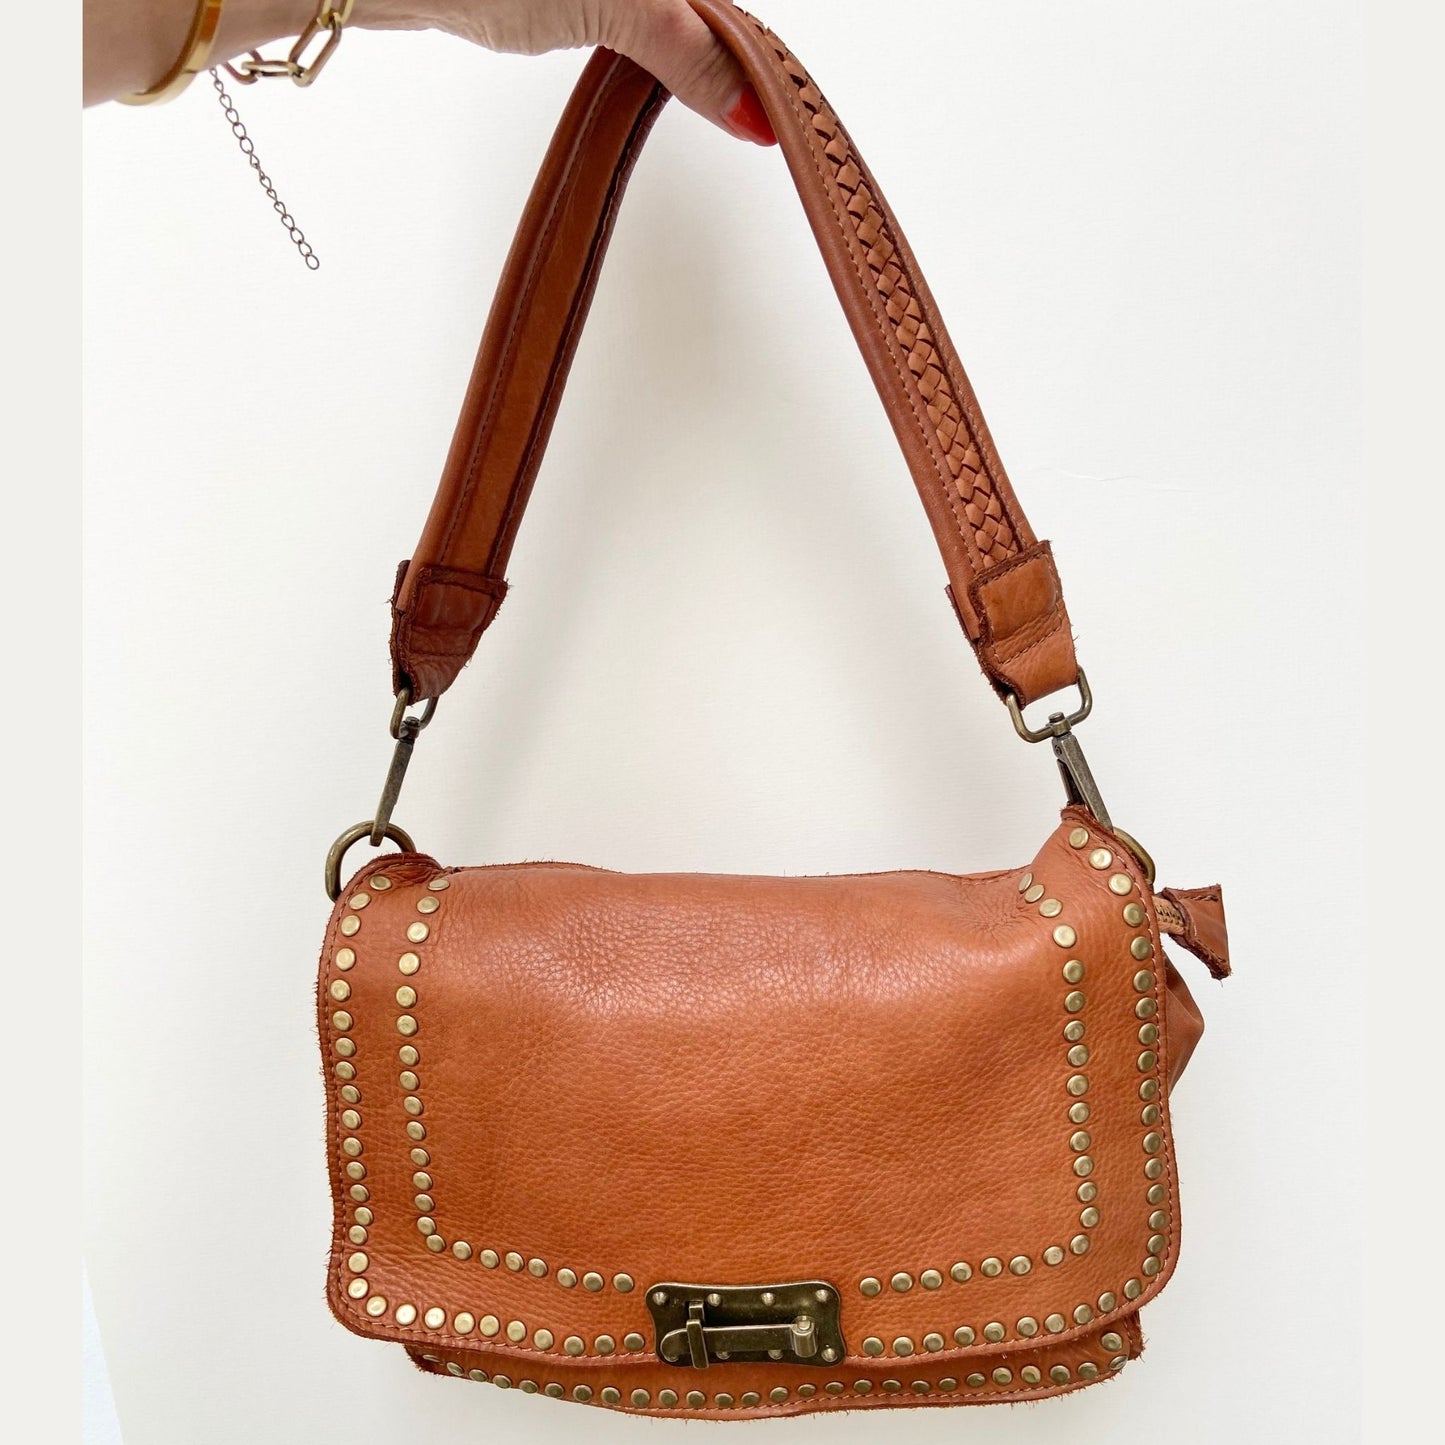 The Studded Vintage Style Leather Bag